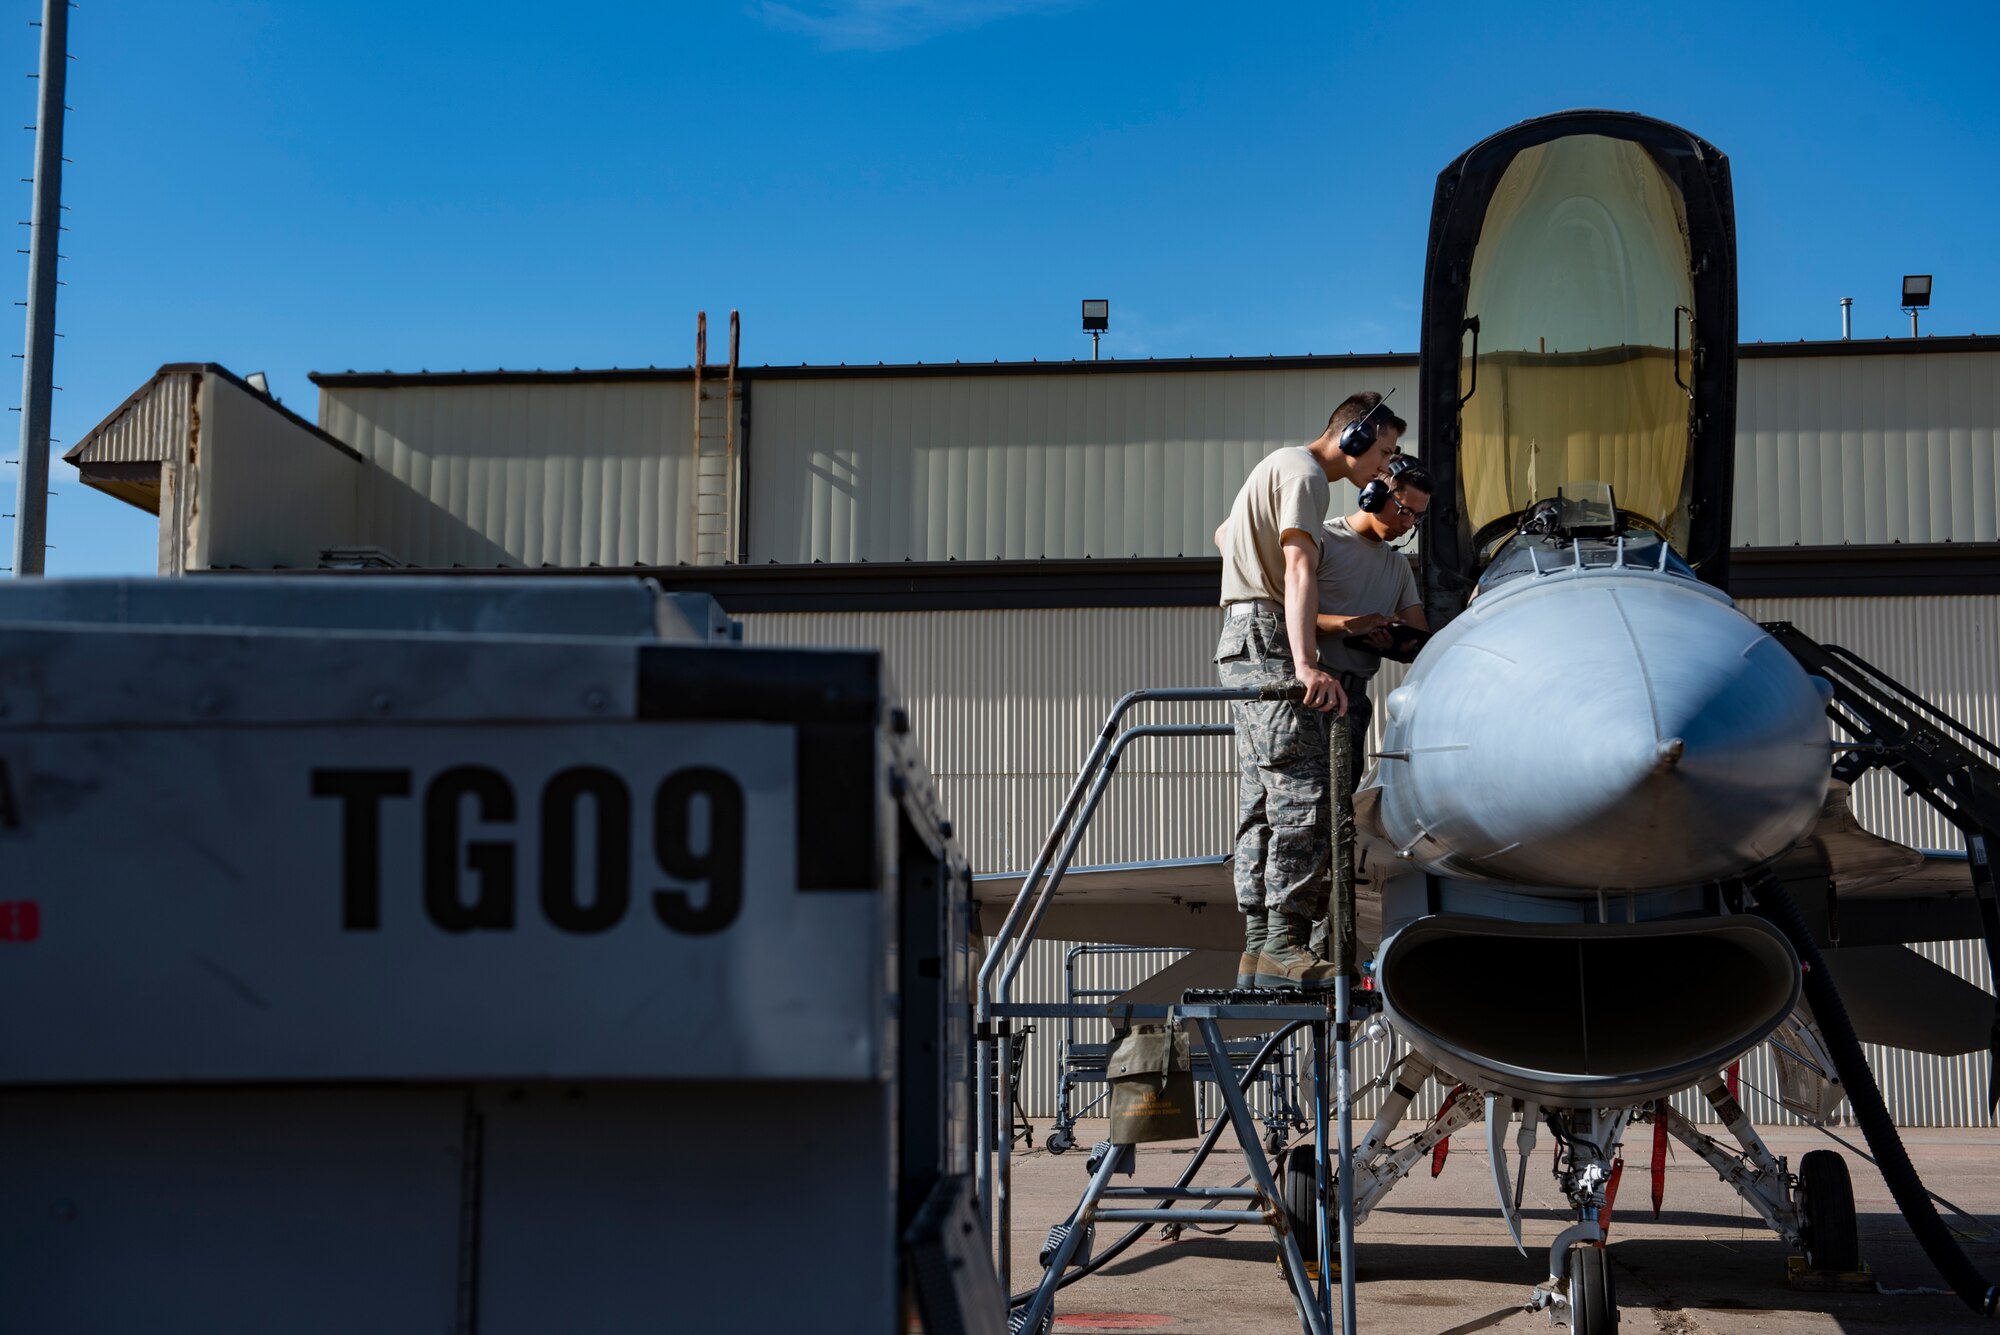 362nd Training Squadron F-16 crew chief apprentice course students look into an F-16 Fighting Falcon's flightdeck at Sheppard Air Force Base, Texas, July 2, 2019. The students are performing a lights operations check and are learning which switch controls what light. (U.S. Air Force photo by Airman 1st Class Pedro Tenorio)